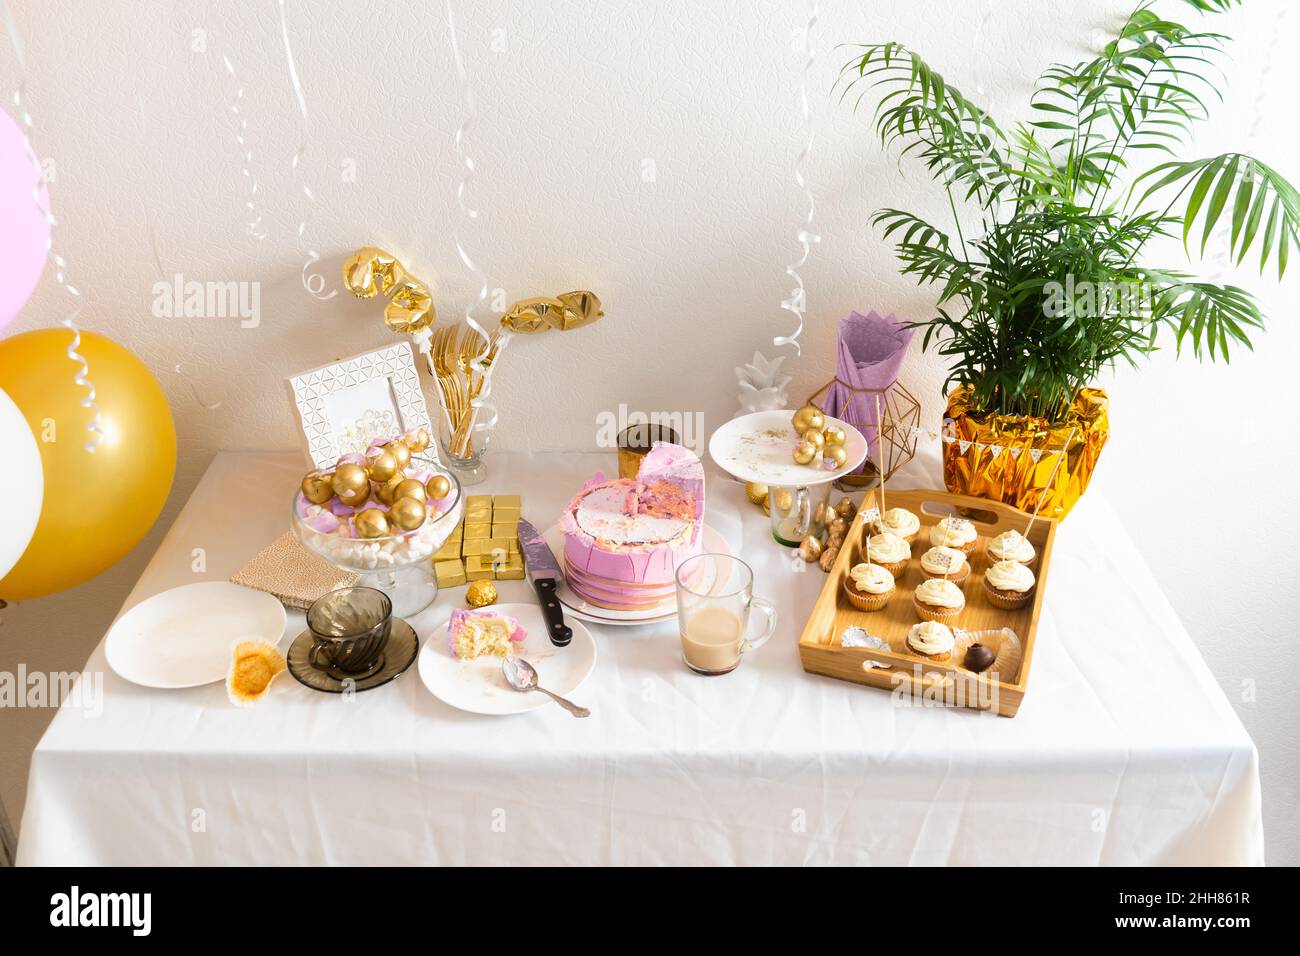 Table with leftovers after birthday with coffee, cake, cupcakes Stock Photo